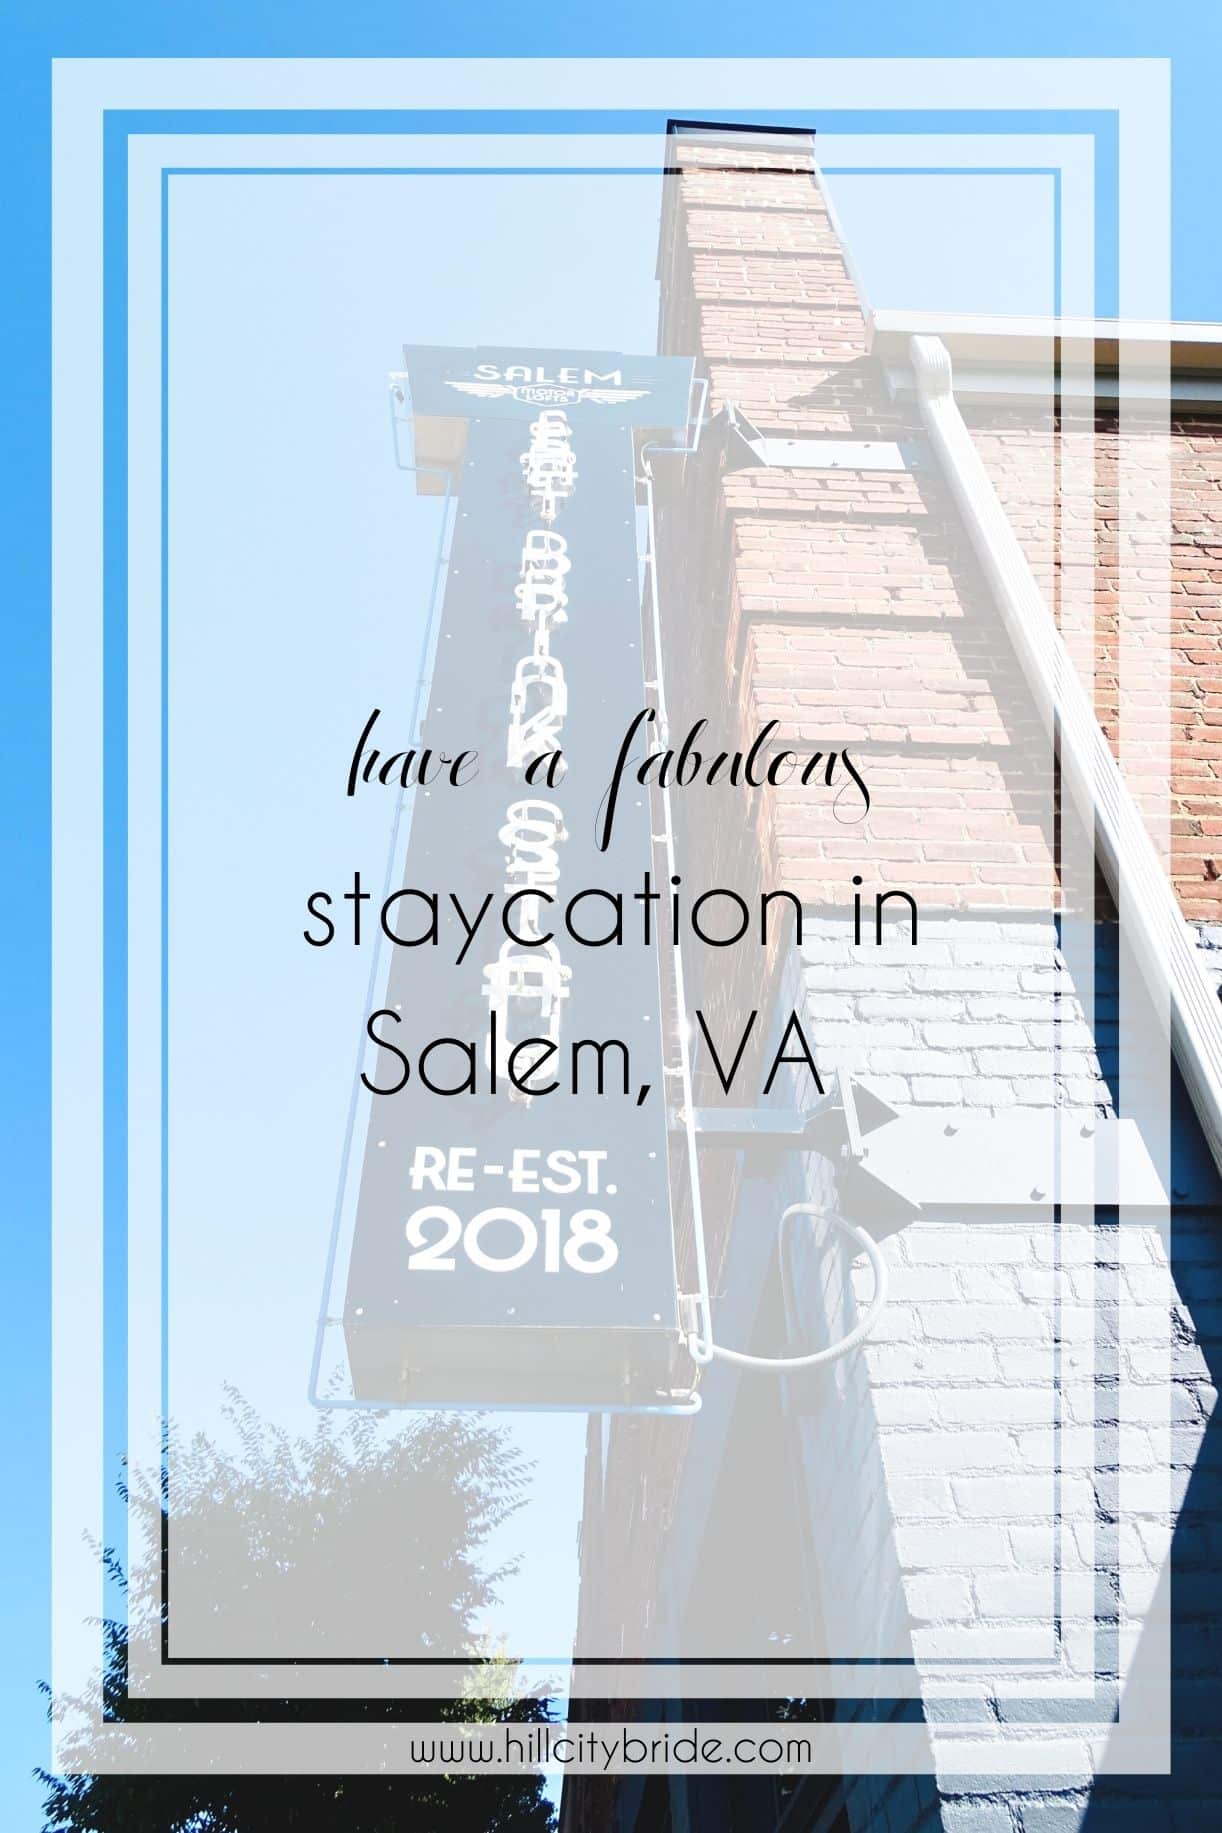 How to Make the Most of a Downtown Salem VA Staycation